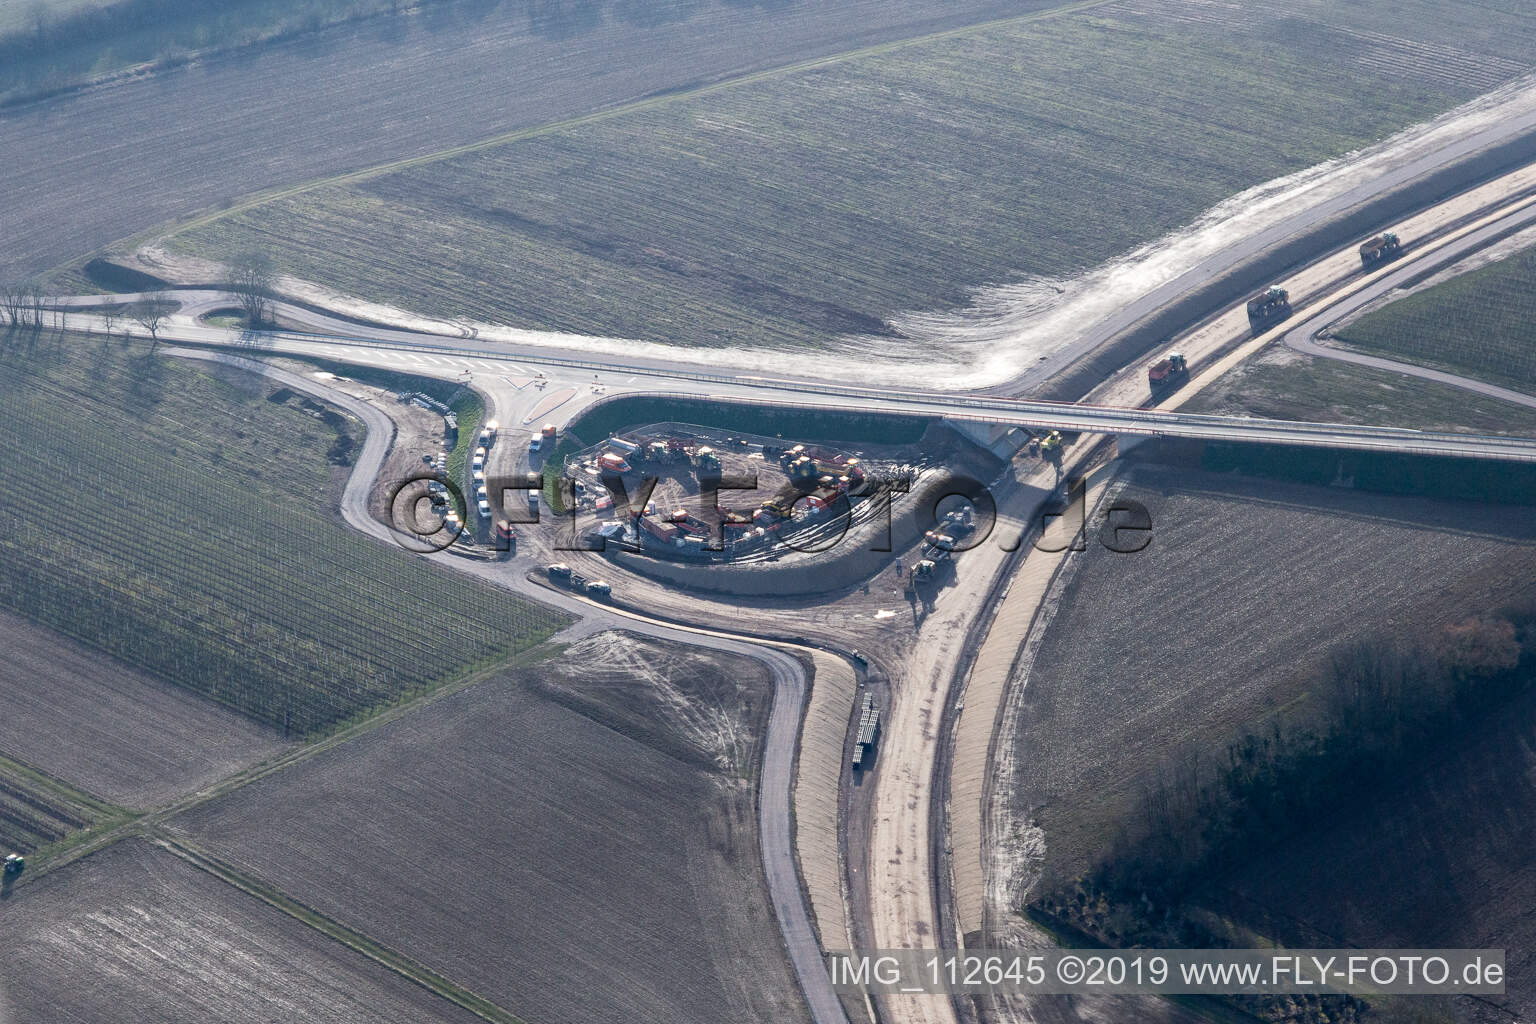 Aerial photograpy of Impflingen in the state Rhineland-Palatinate, Germany